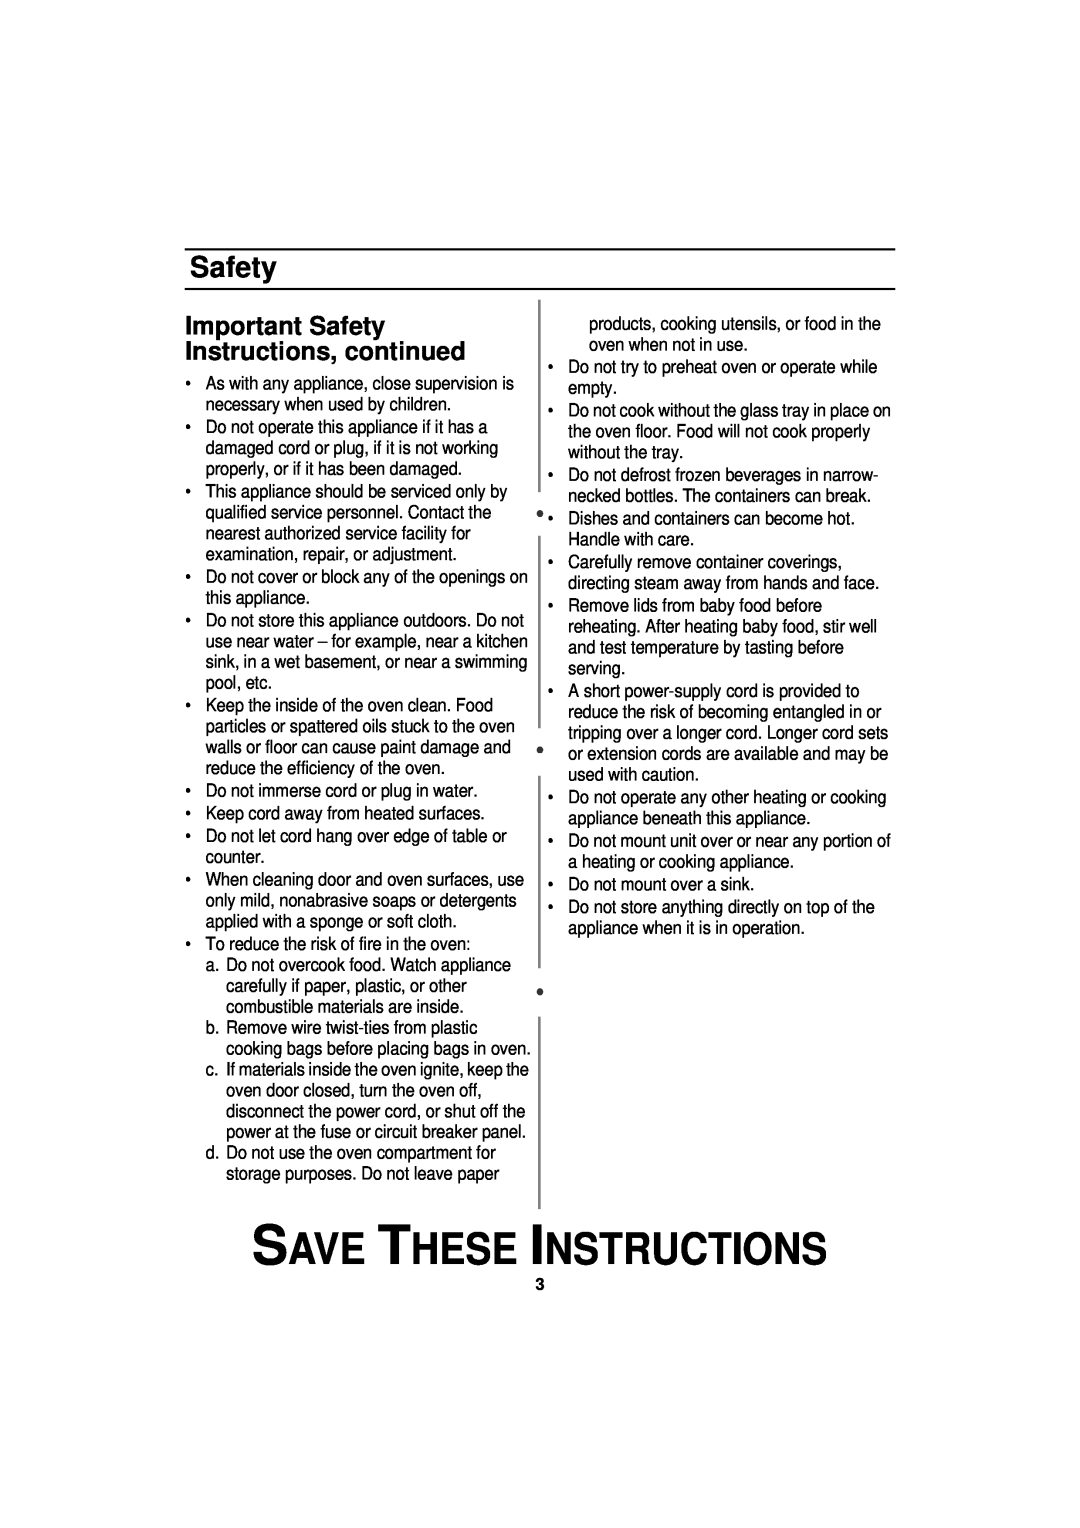 Samsung MW830WA owner manual Save These Instructions, Important Safety Instructions, continued 